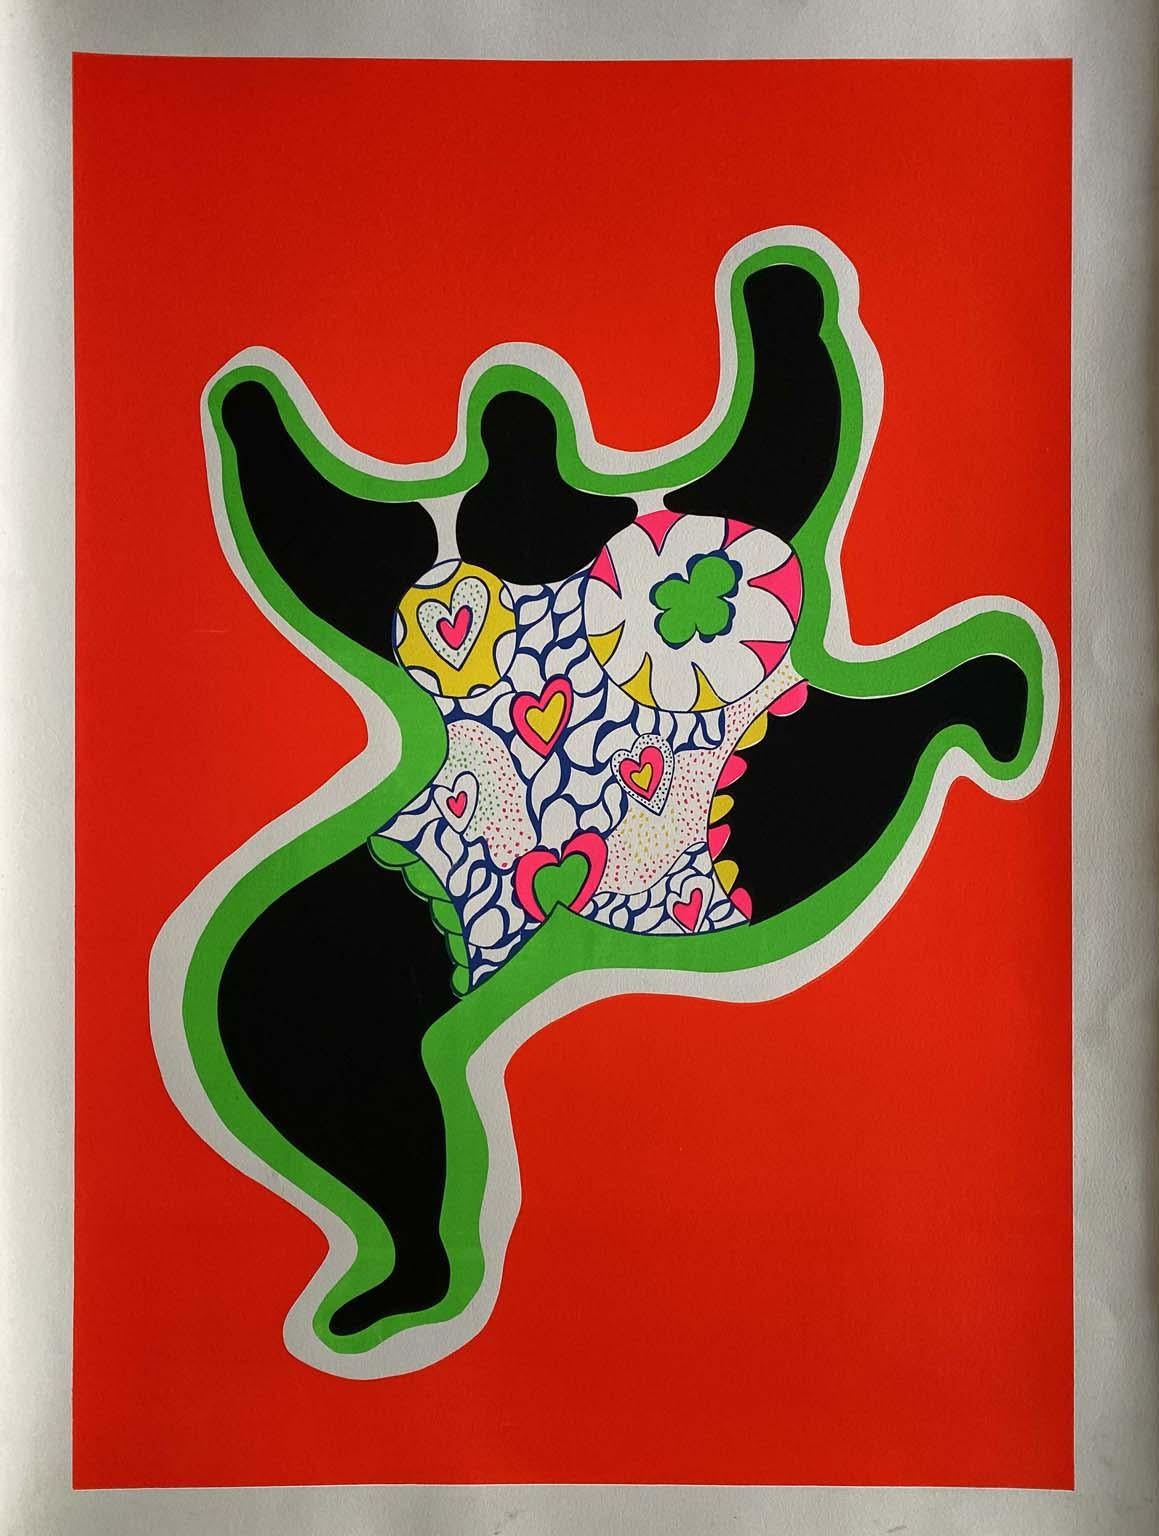 Niki de Saint Phalle Abstract Print - (Nana) from Nana Power color serigraphs on Arches vellum, Editions Essellier